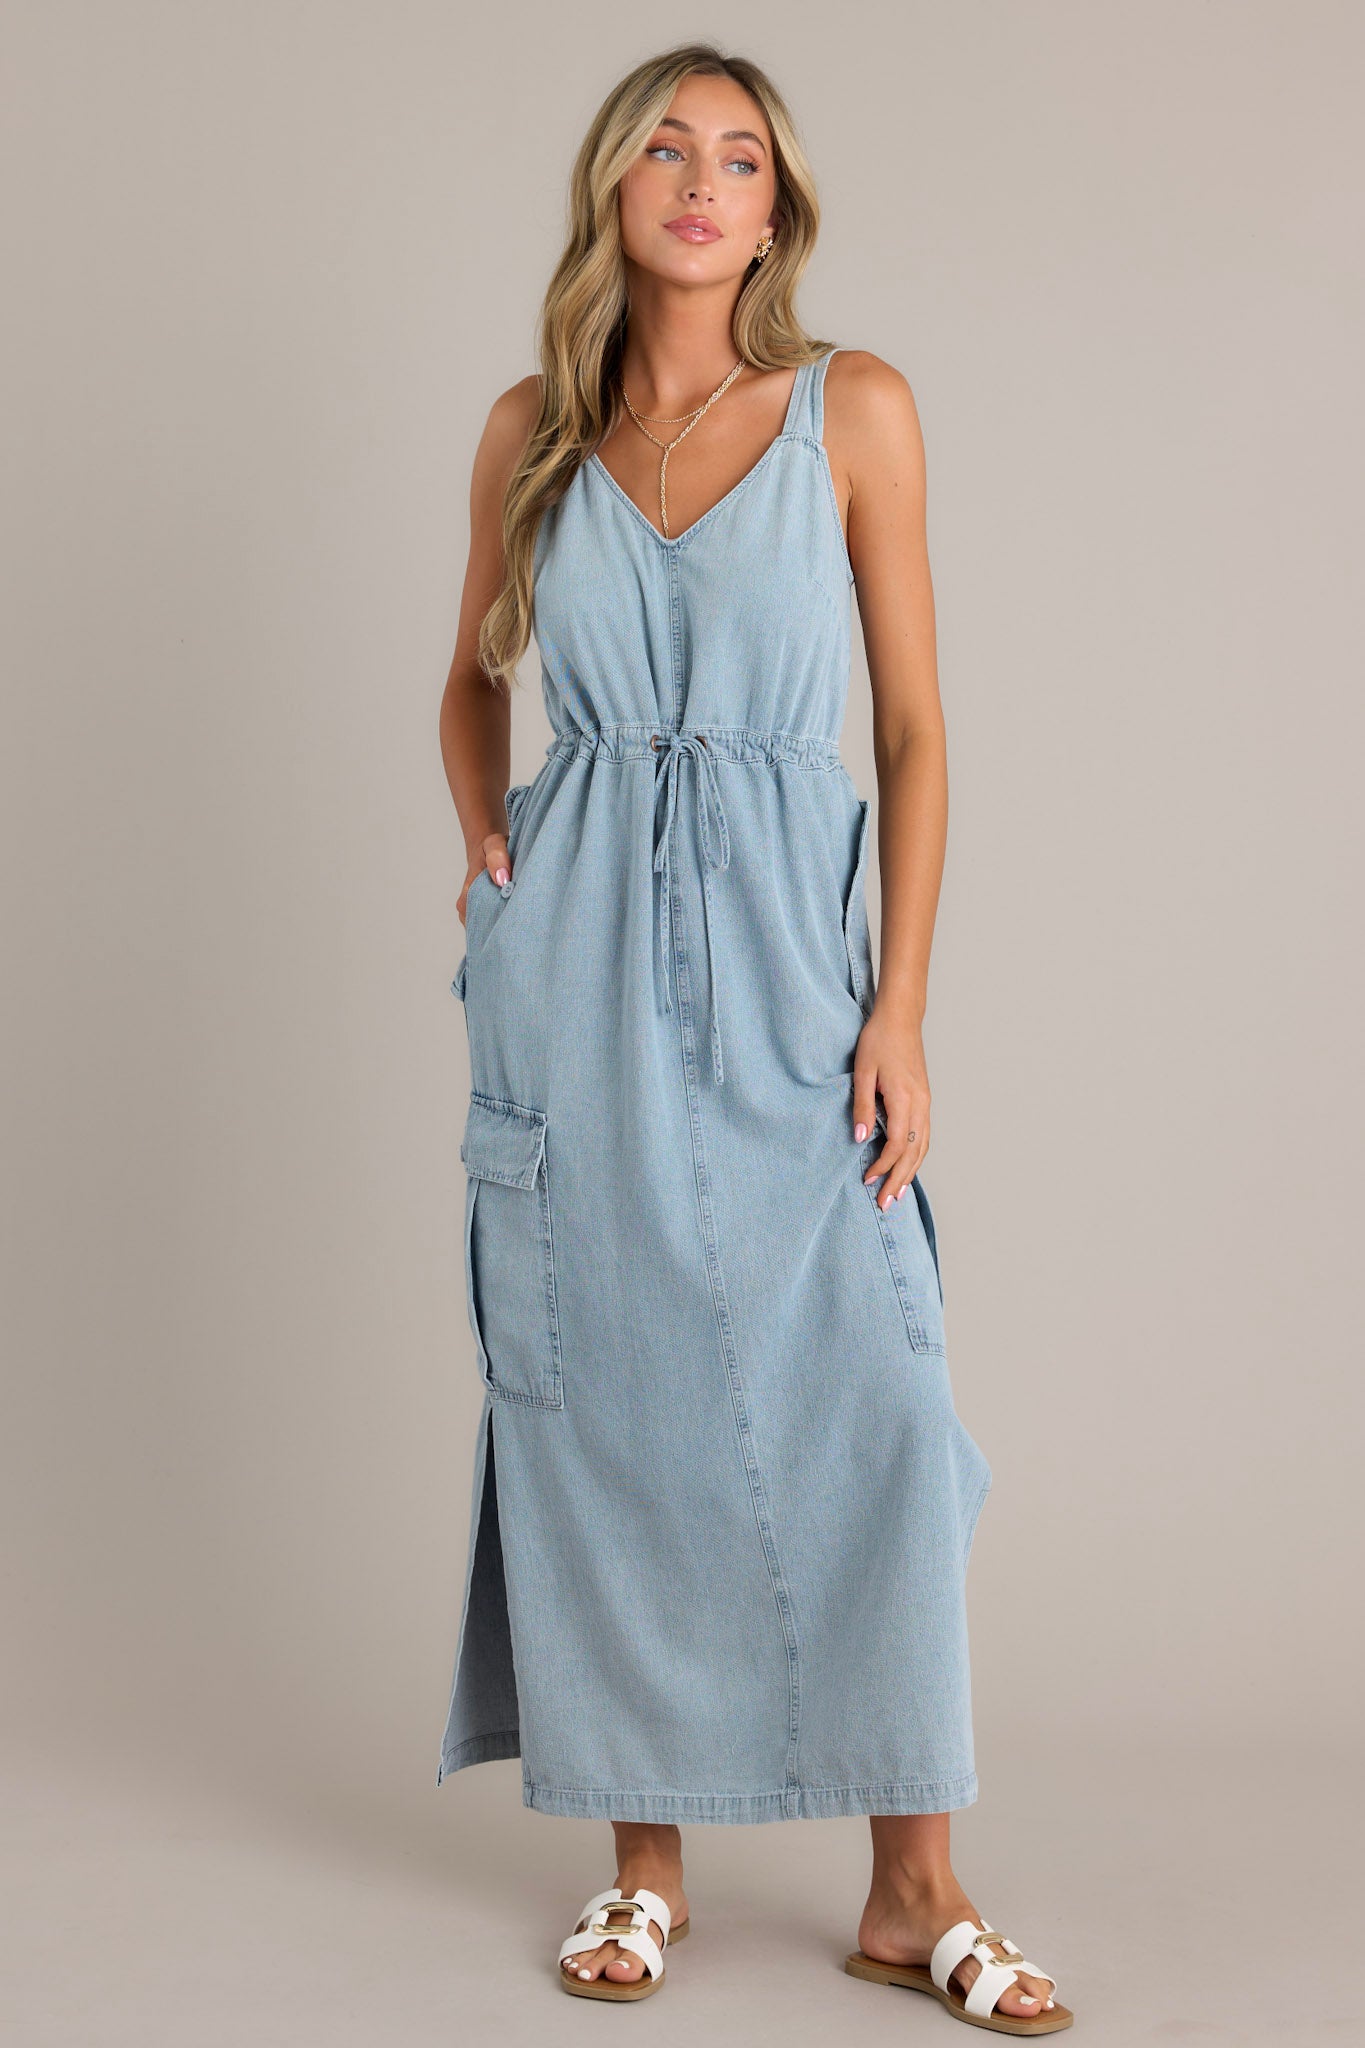 This chambray maxi dress features a v-neckline, thick adjustable straps, a self-tie drawstring waist, functional button hip, lower leg, and back pockets, and side slits.